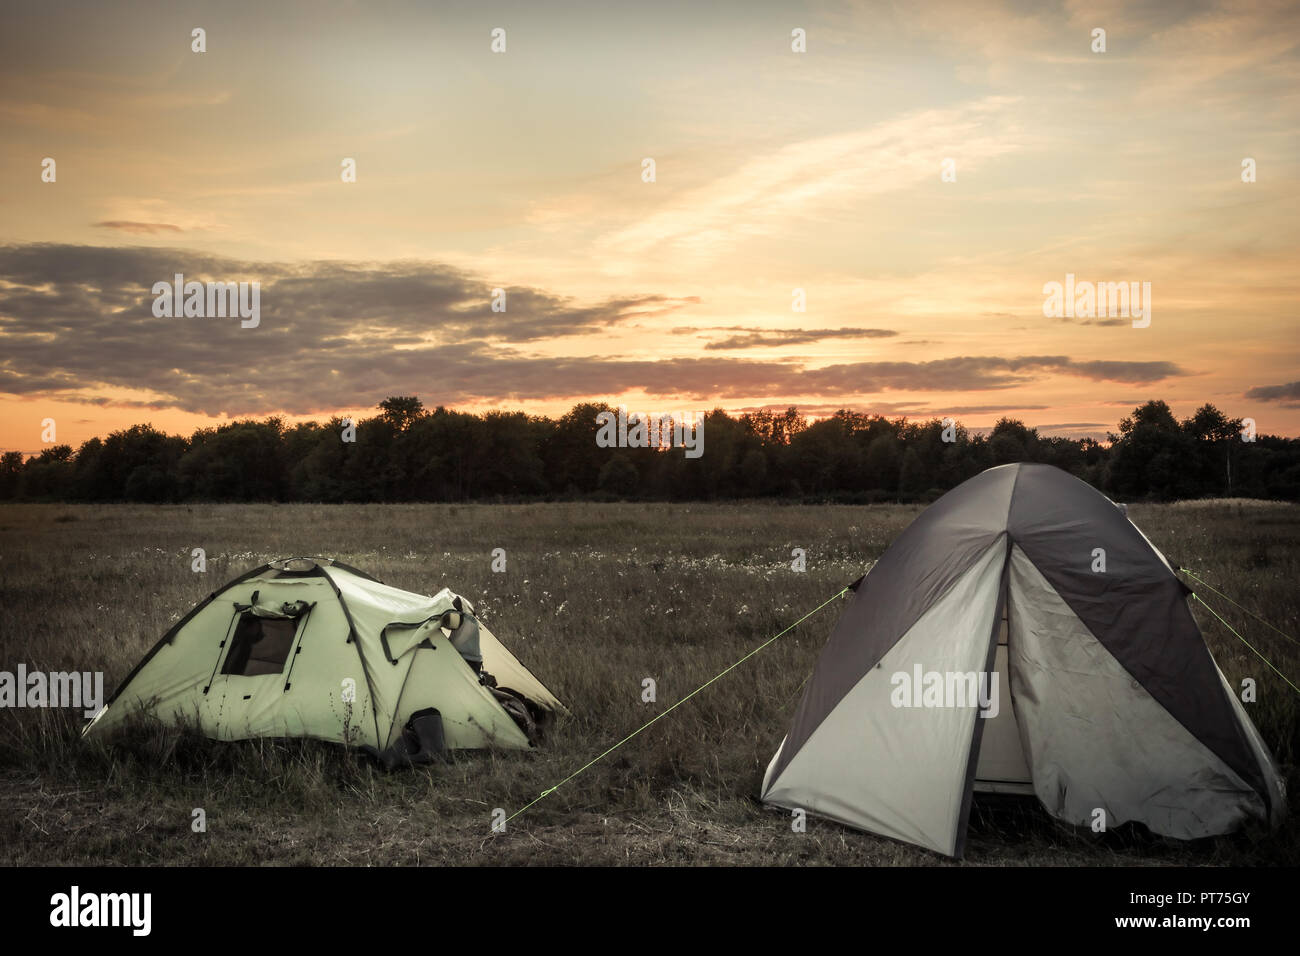 Camping tents on camping sites on summer flatland field plain and dramatic sunset sky during camping holidays Stock Photo